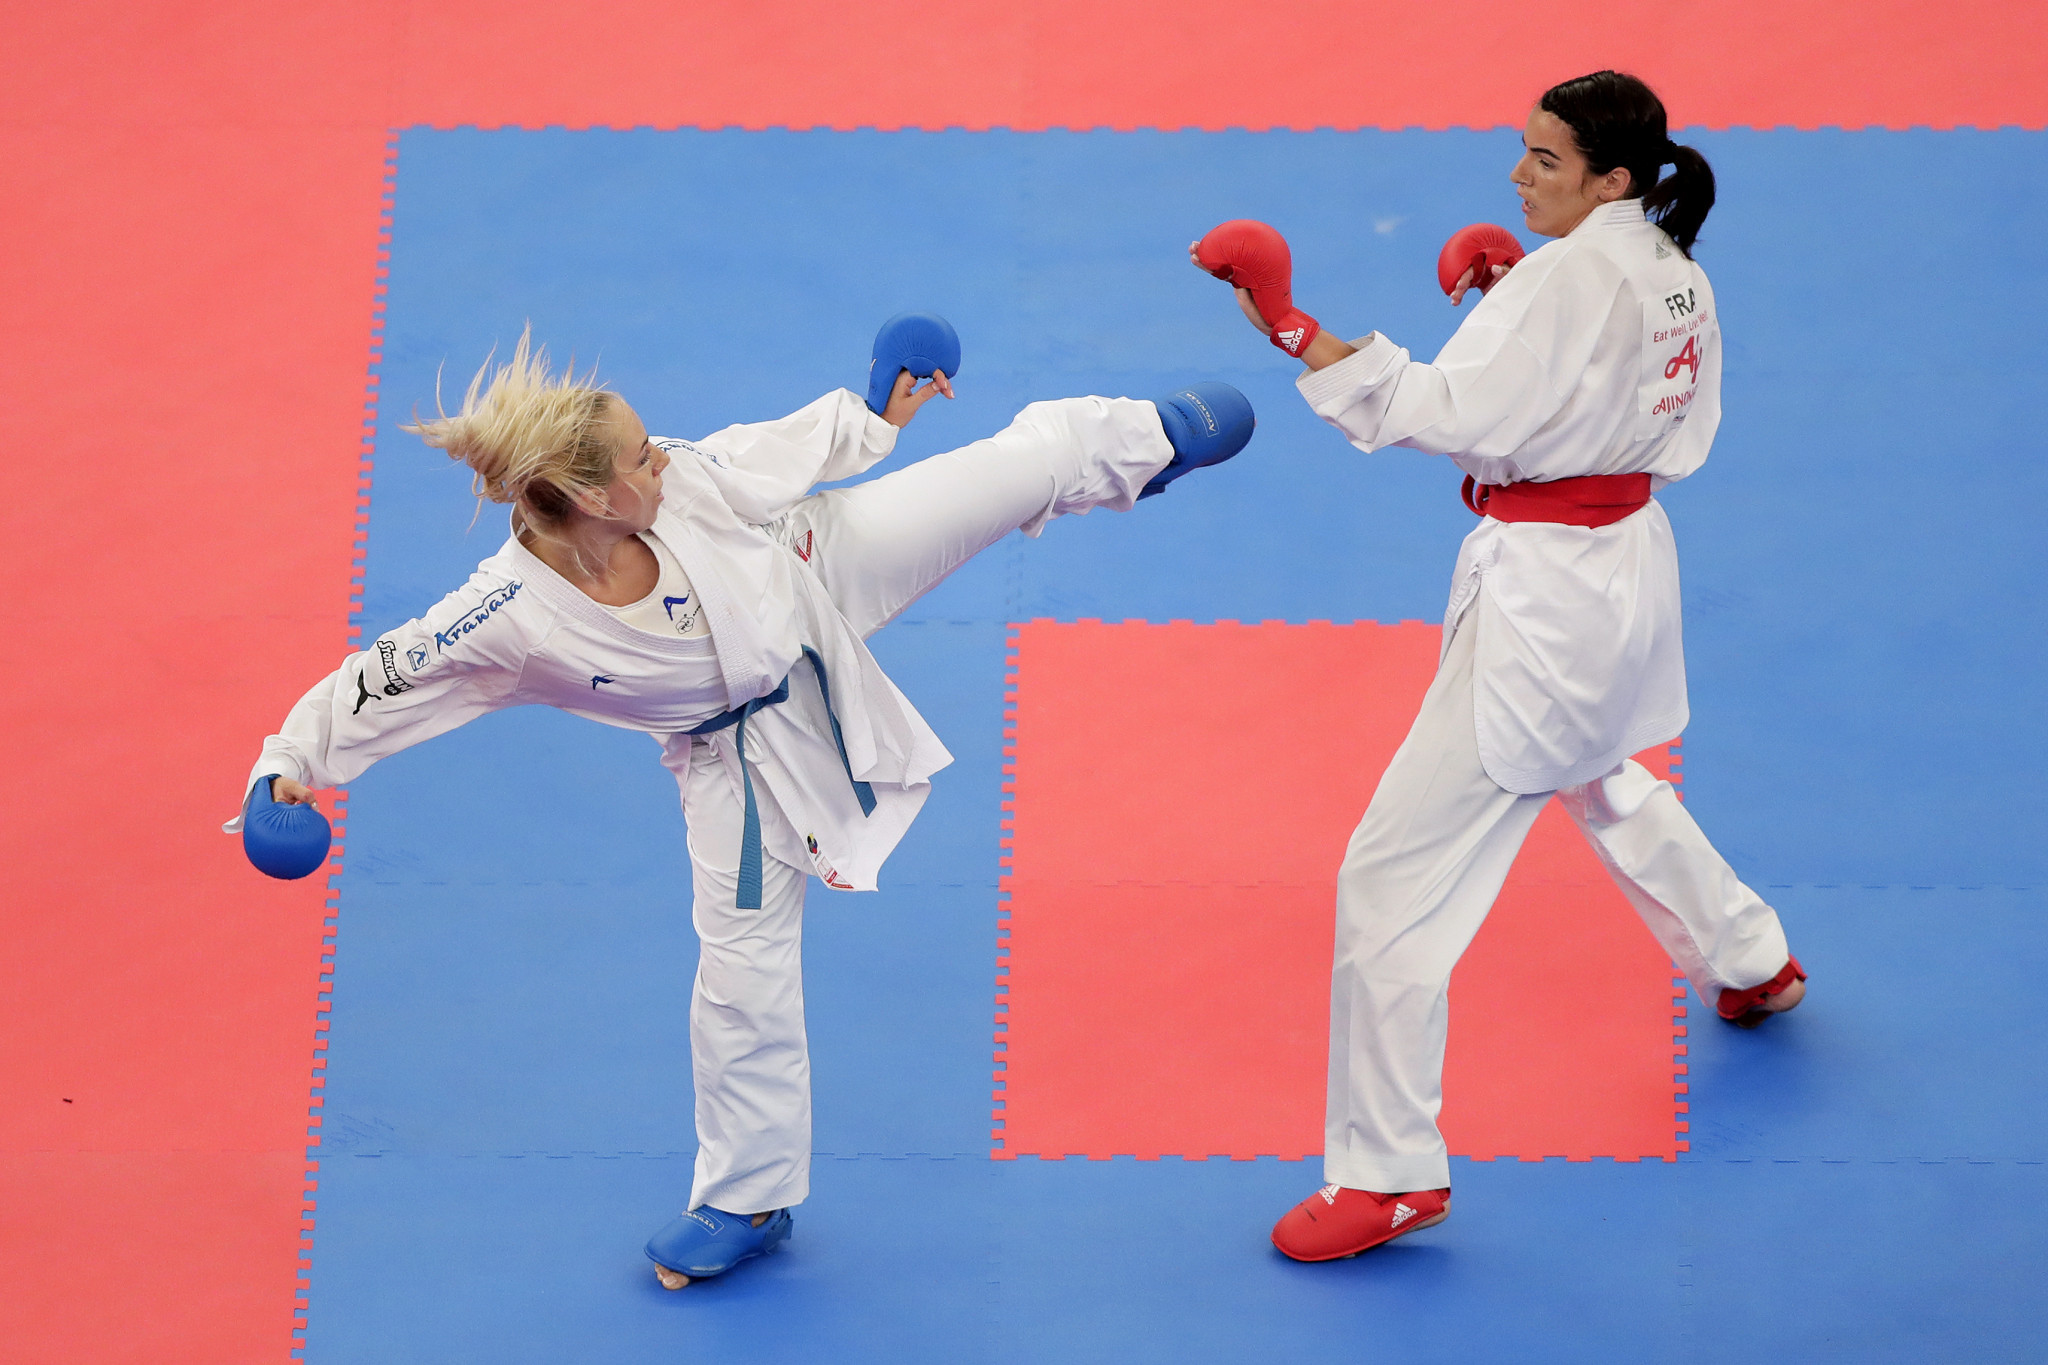 WKF hires communications firm to make most of Tokyo 2020 debut